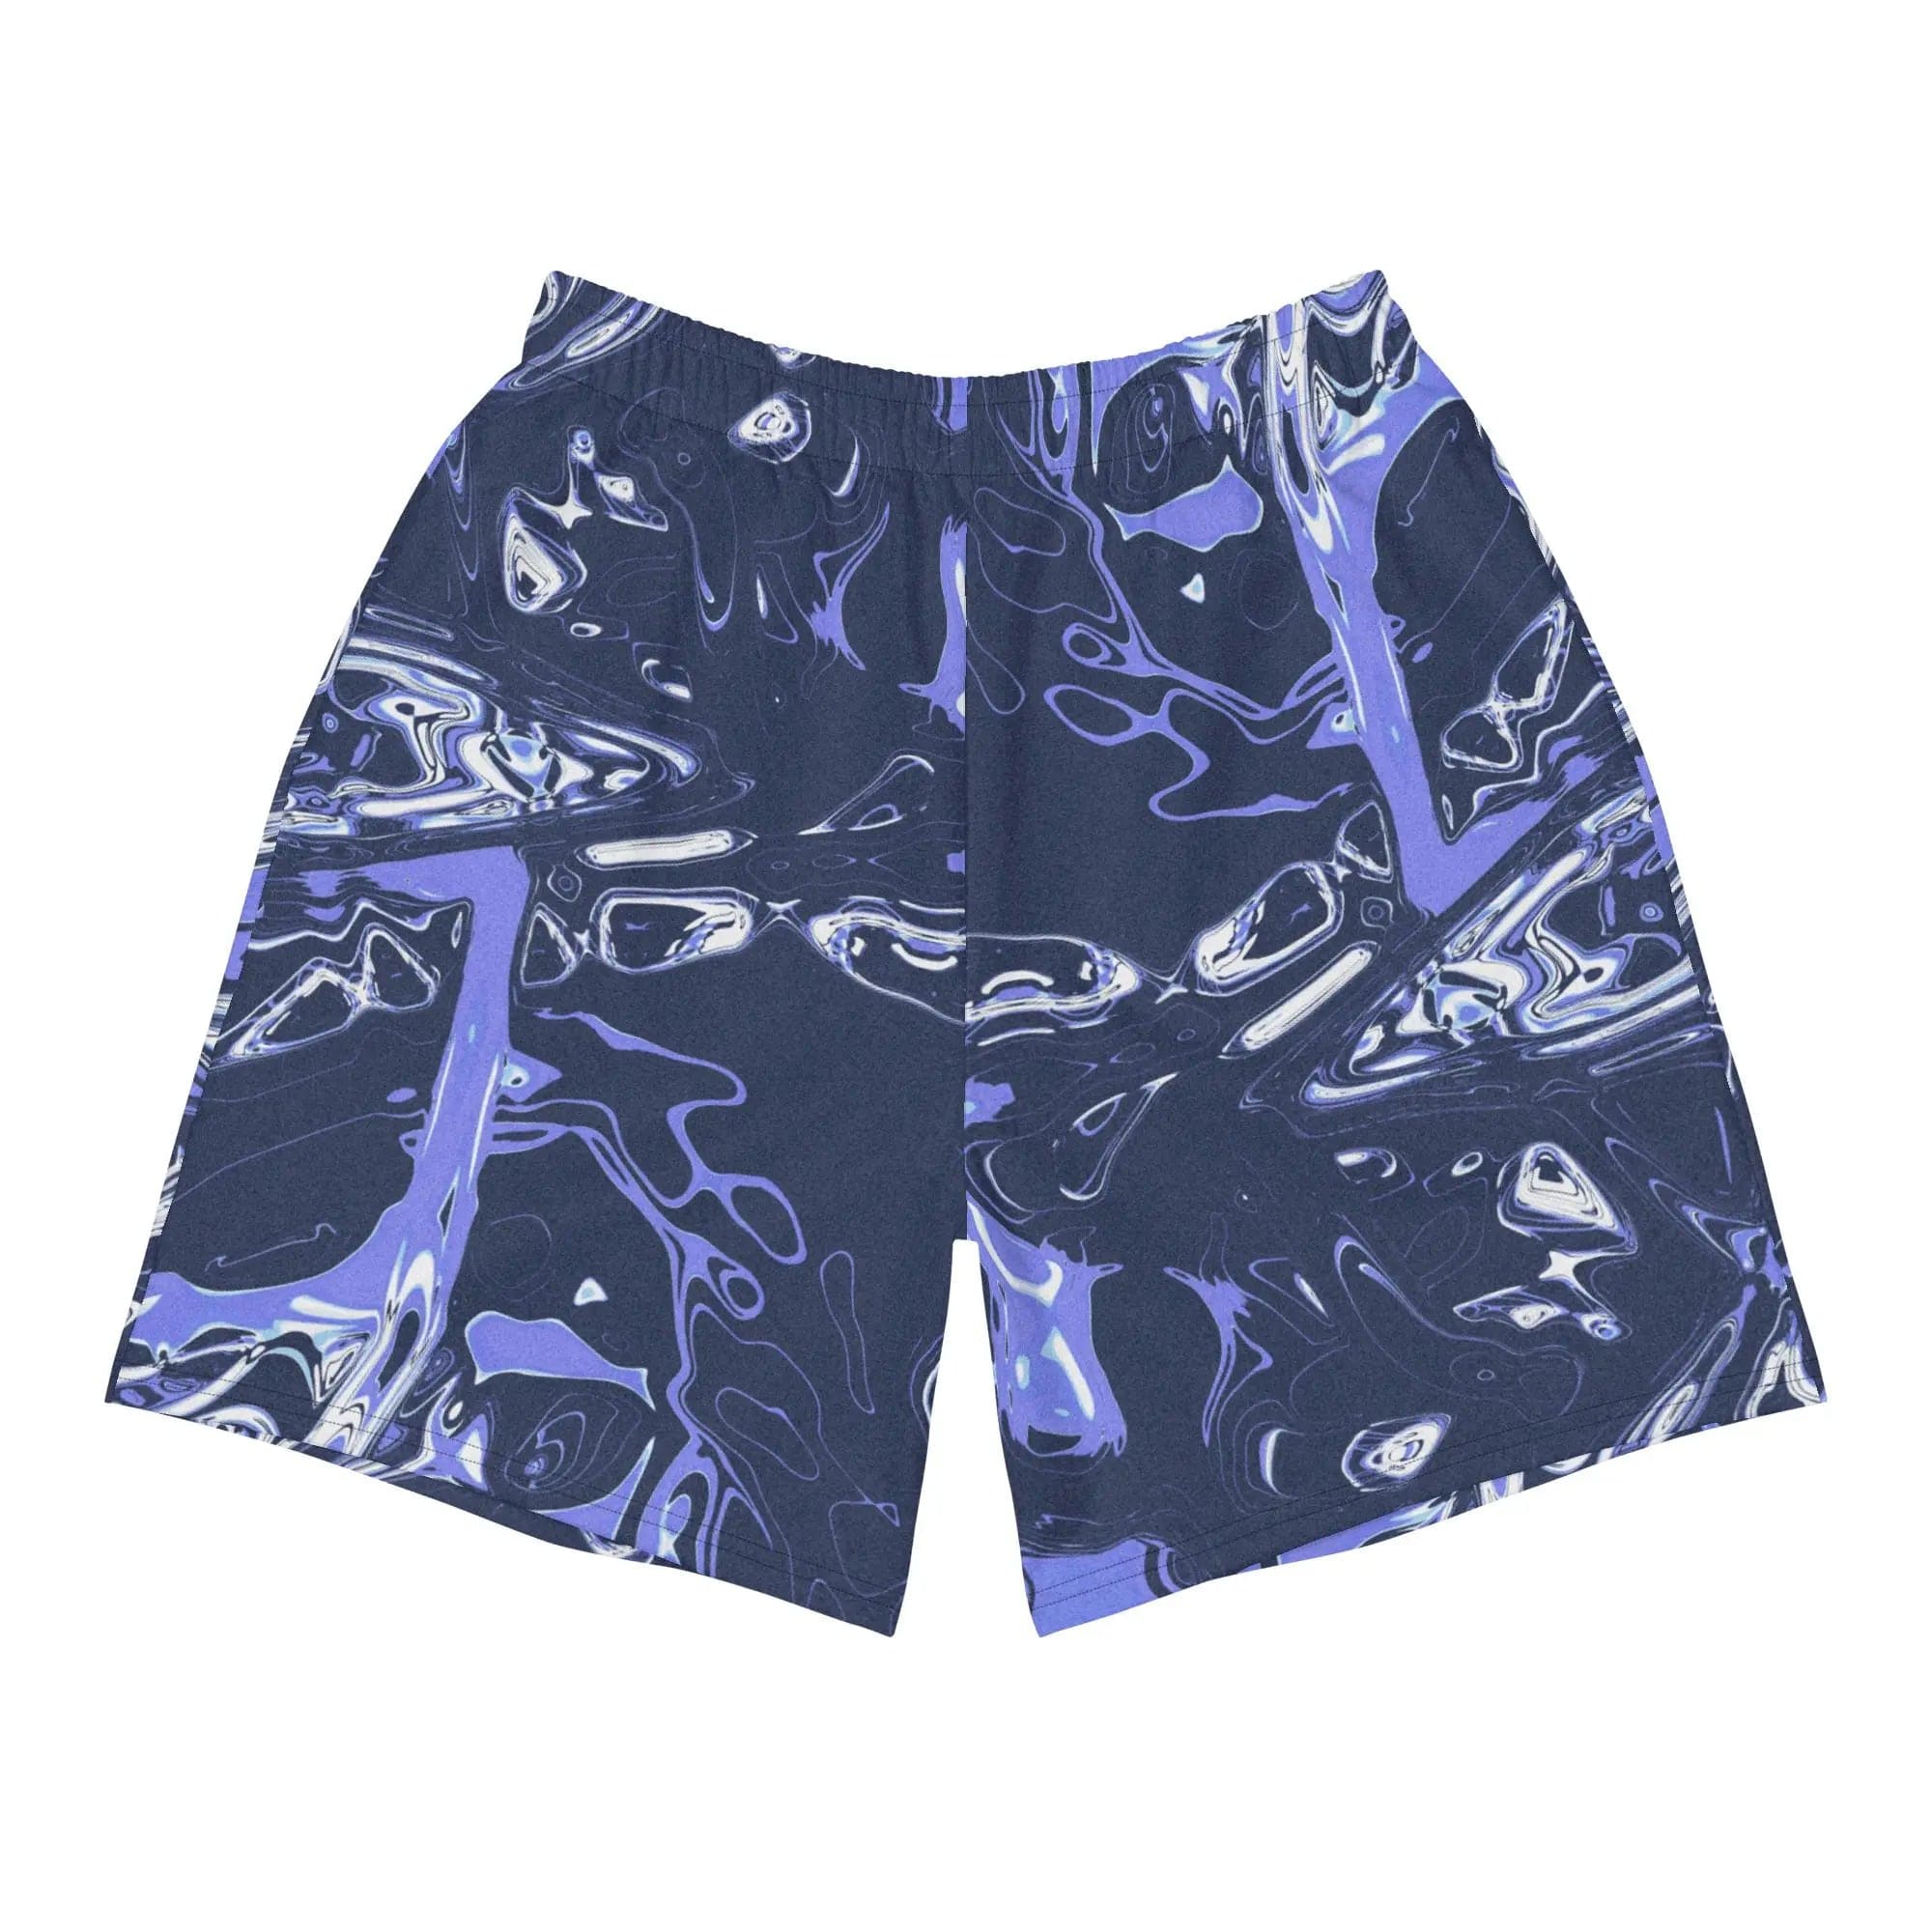 all-over-print-mens-recycled-athletic-shorts-white-front-640c9b428d27c-10370976.jpg